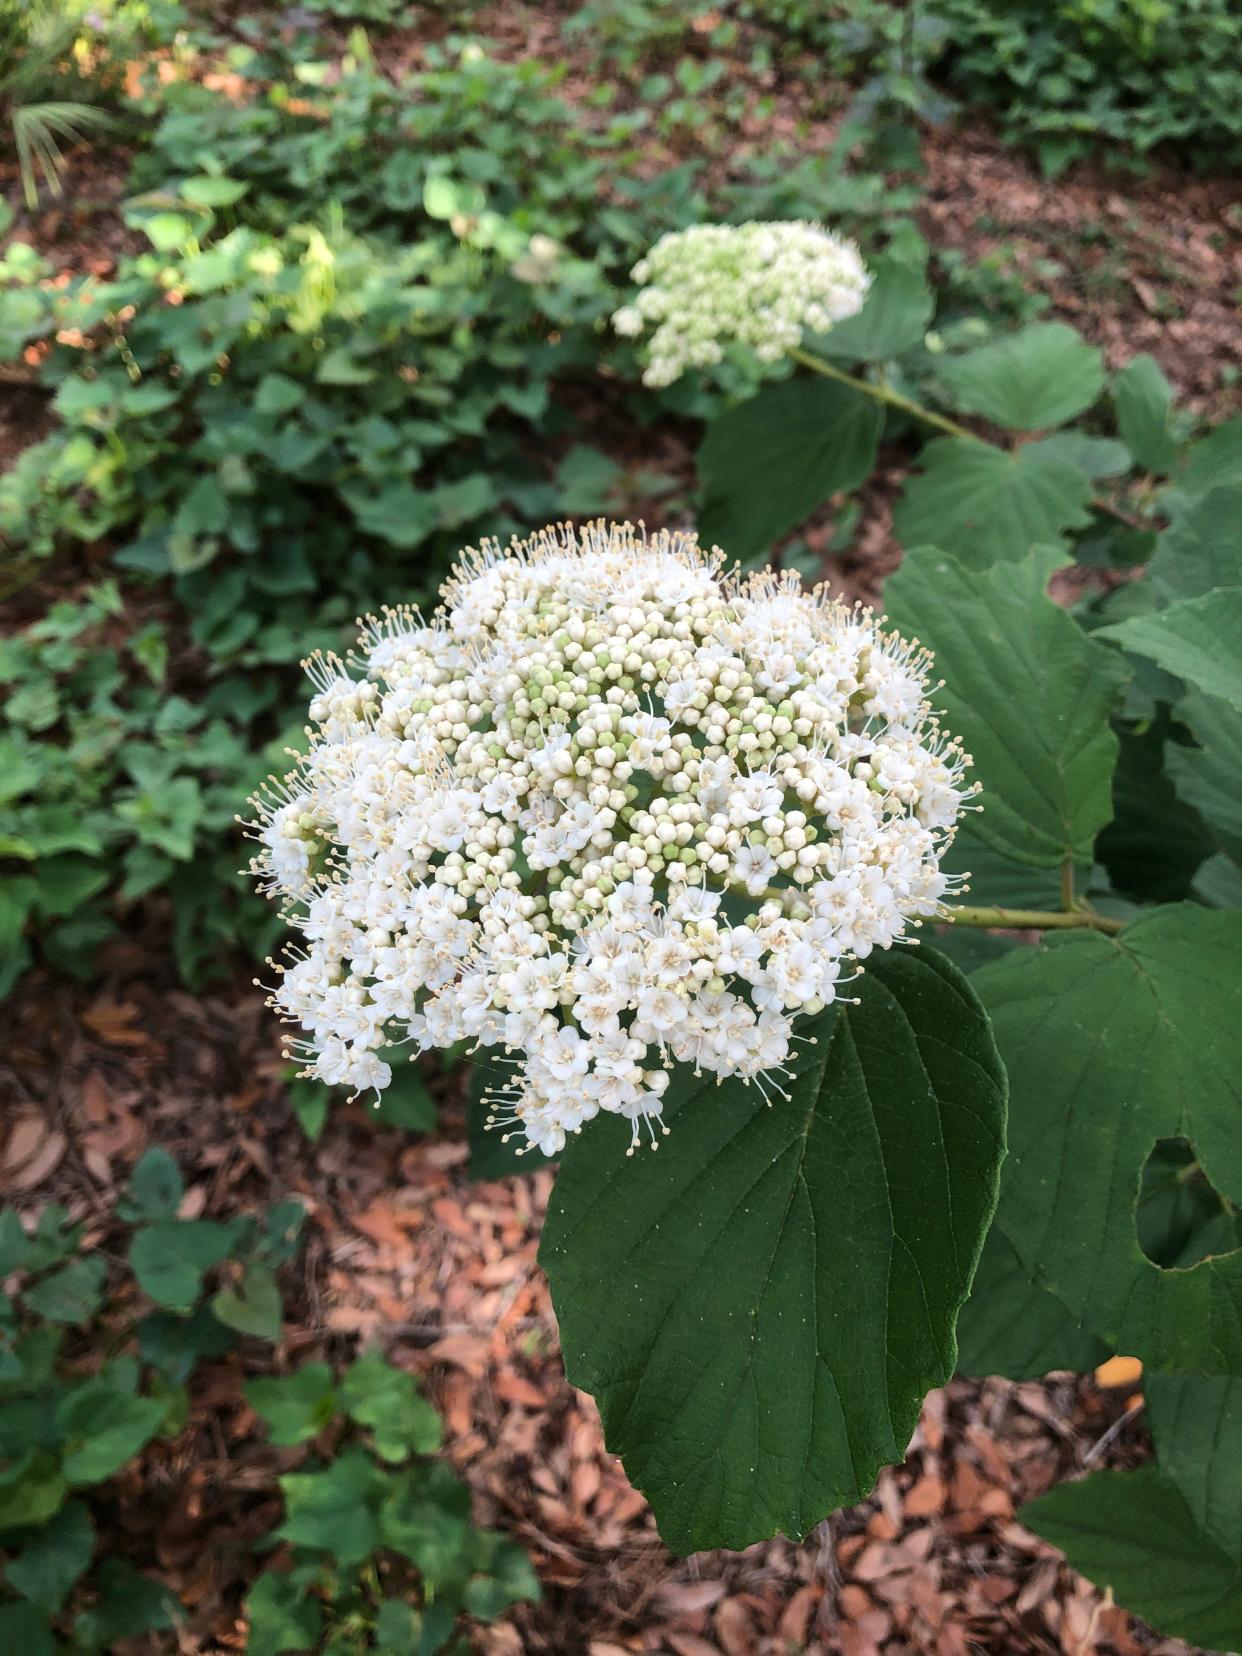 Arrowwood viburnum is a native shrub with small white blooms in spring.